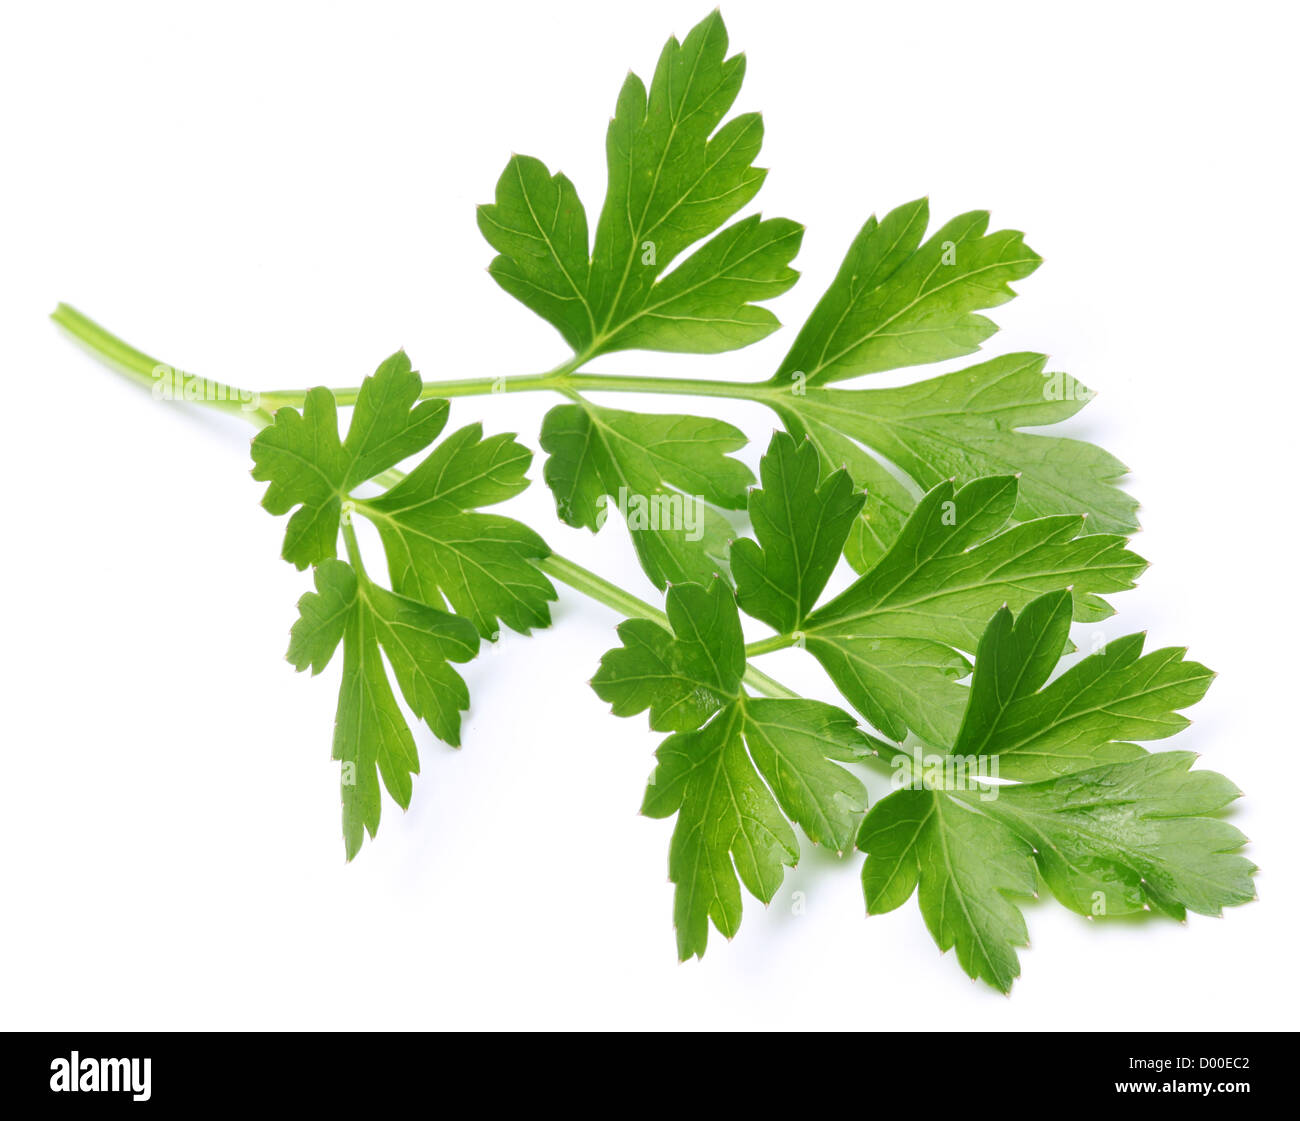 Parsley on a white background. Stock Photo